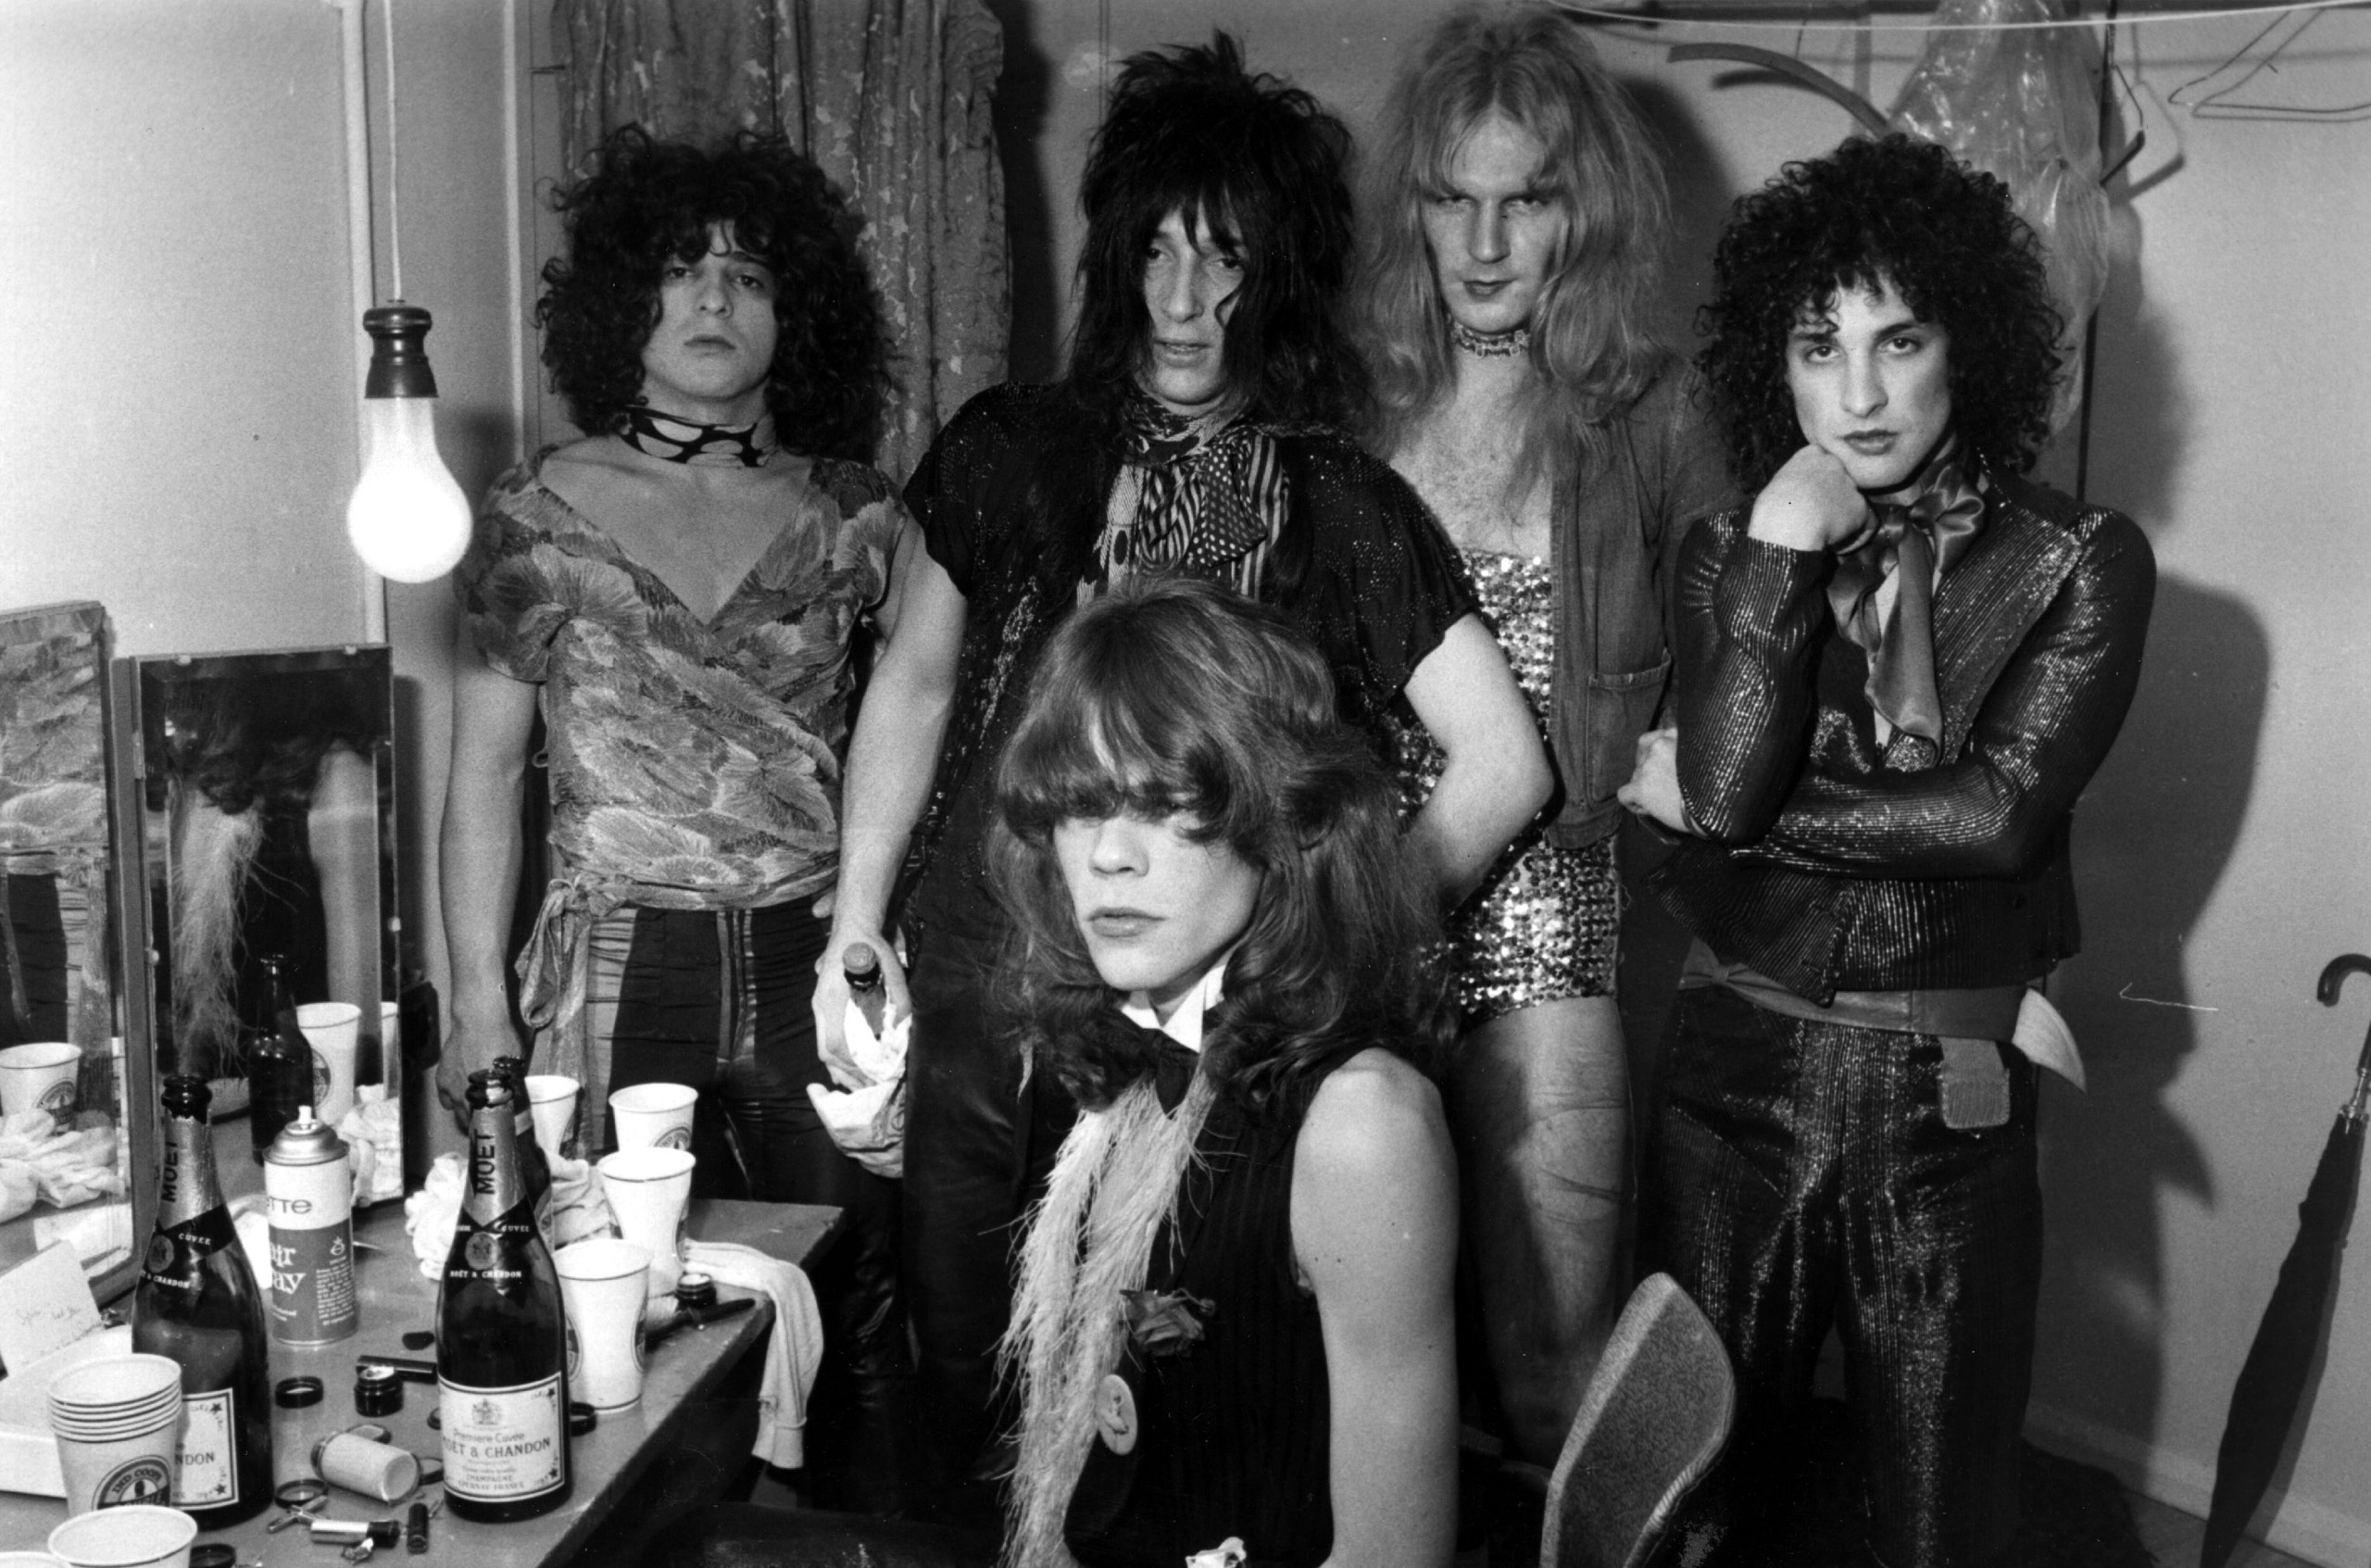 Influential American glam rock band the New York Dolls; David Johansen, front, Jerry Nolan, Johnny Thunders, Killer Kane and Sylvain Sylvain, pose in a dressing room. 1972.